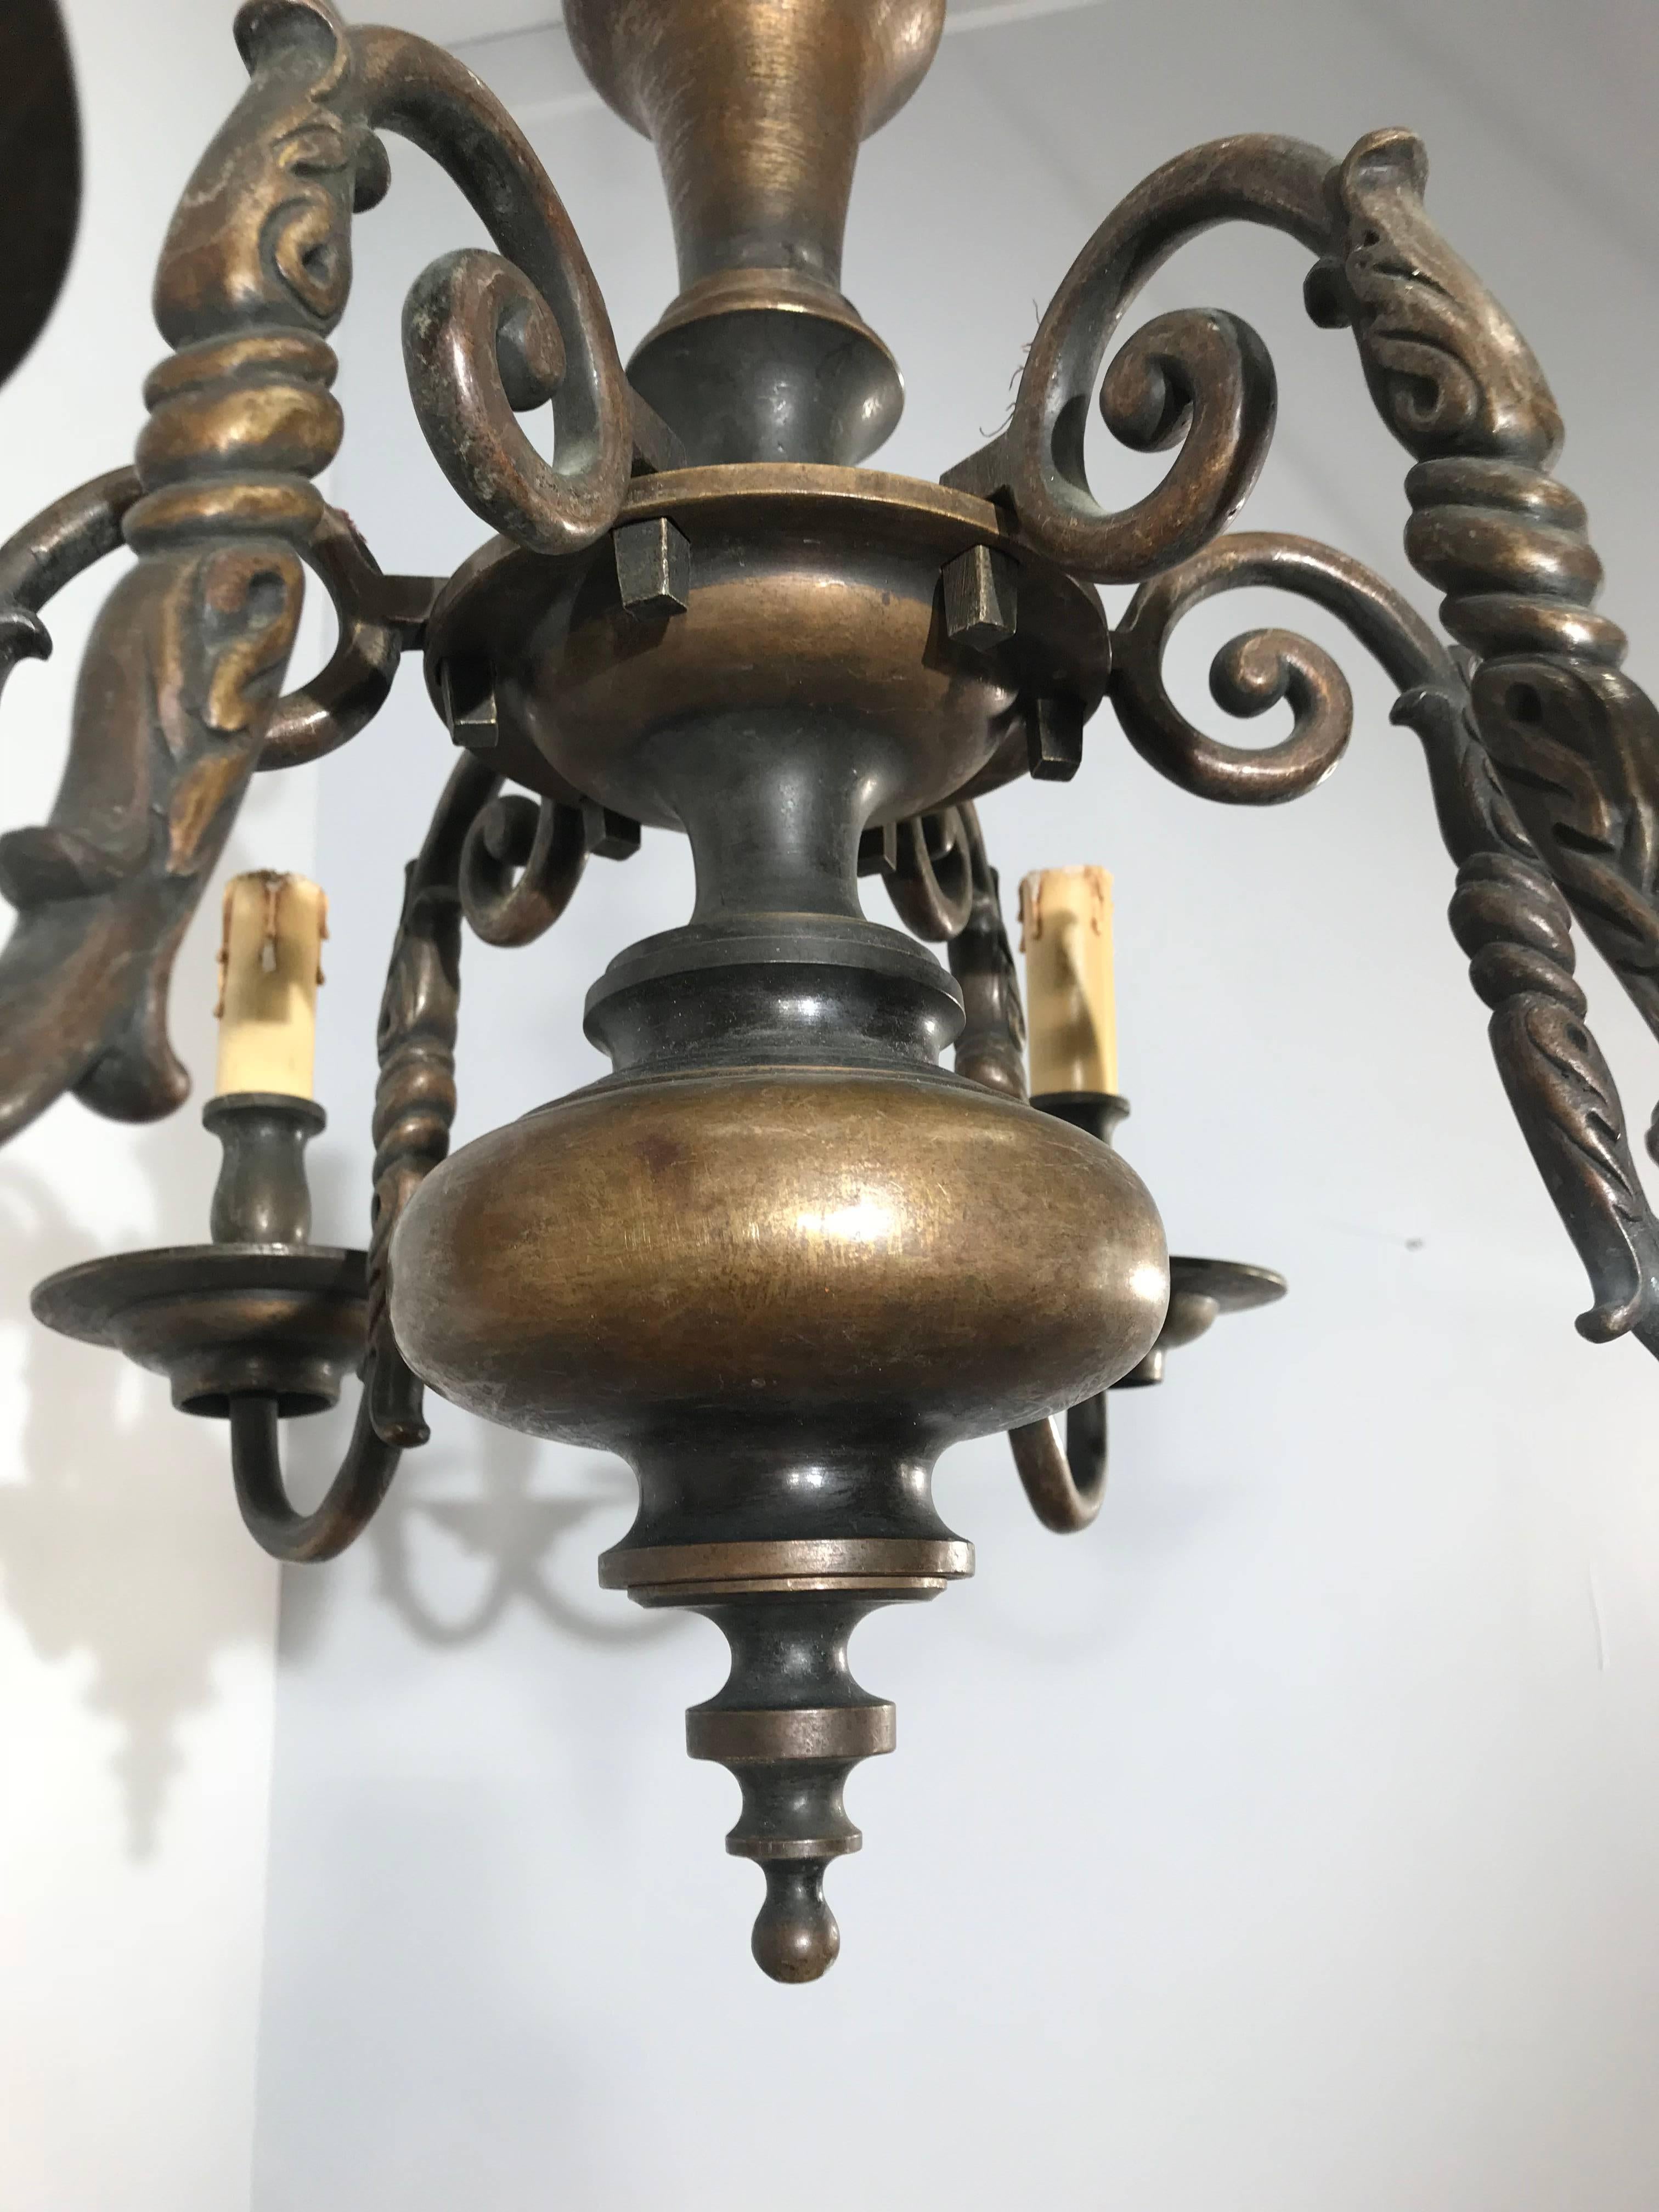 Medieval Antique Classic Design Heavy Bronze Six-Arm Candle or Electric Chandelier